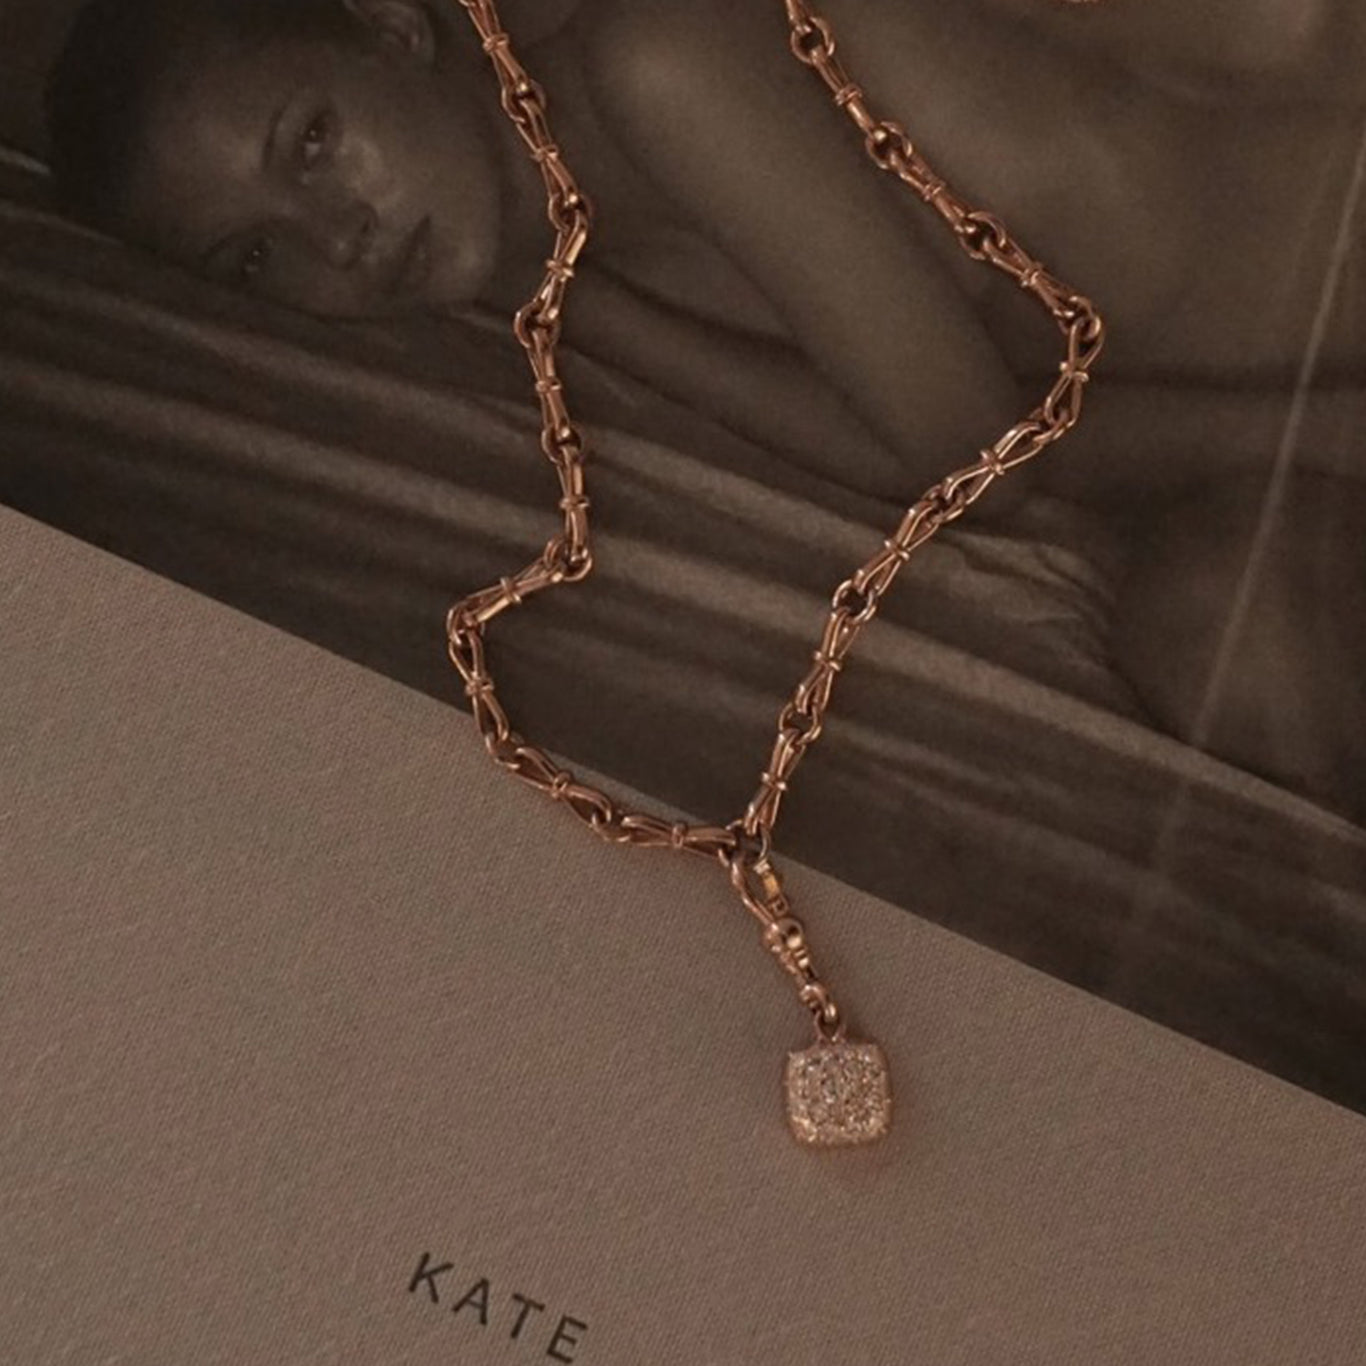 The Trilogy Necklace shown in Rose Gold